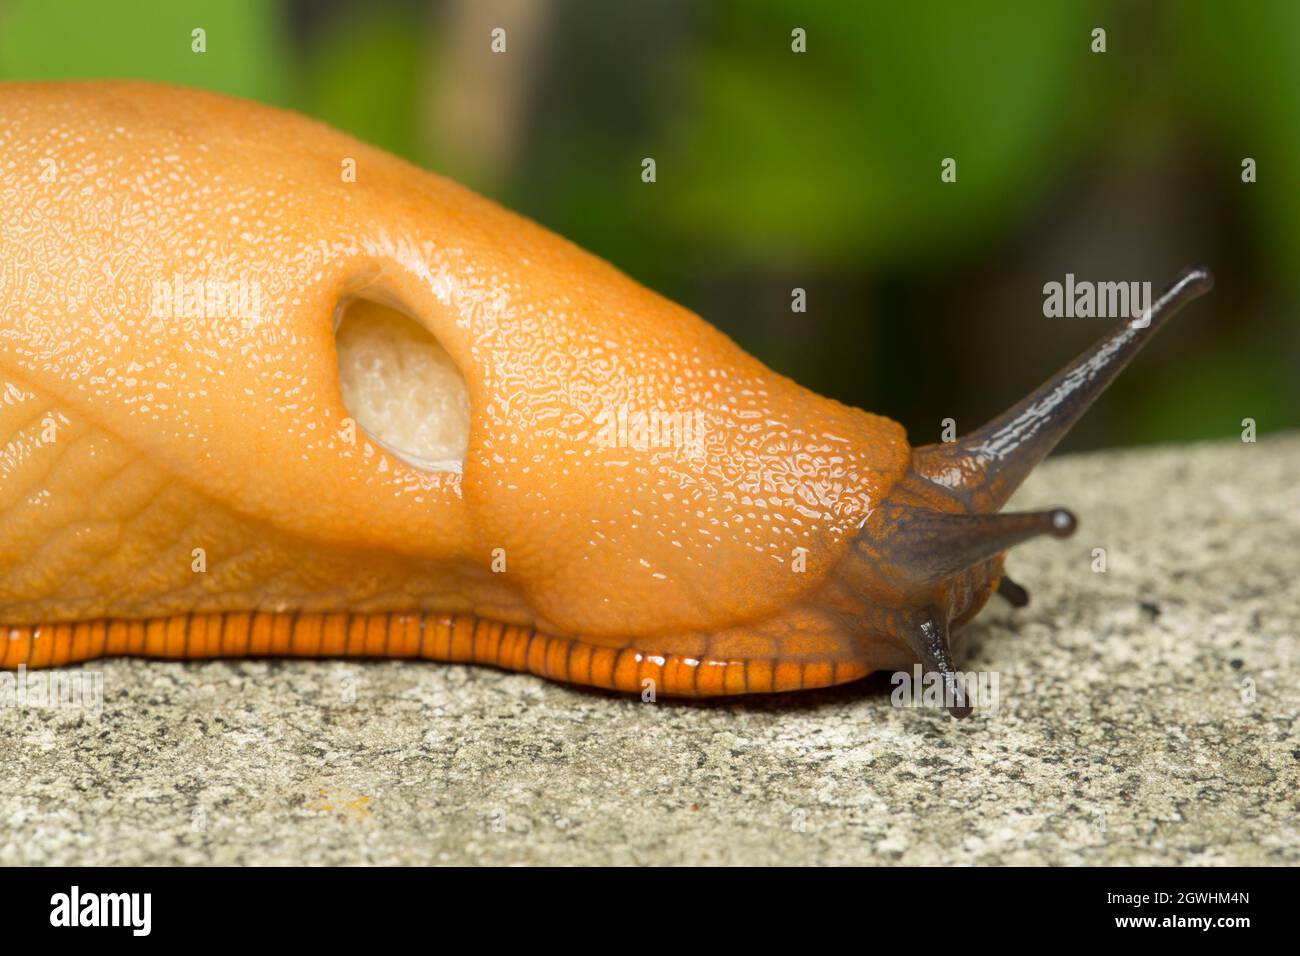 A large red slug, Arion ater, out at night on a patio near a garden pond. Its open pneumostome or breathing pore can be seen in the picture. Lancashir Stock Photo